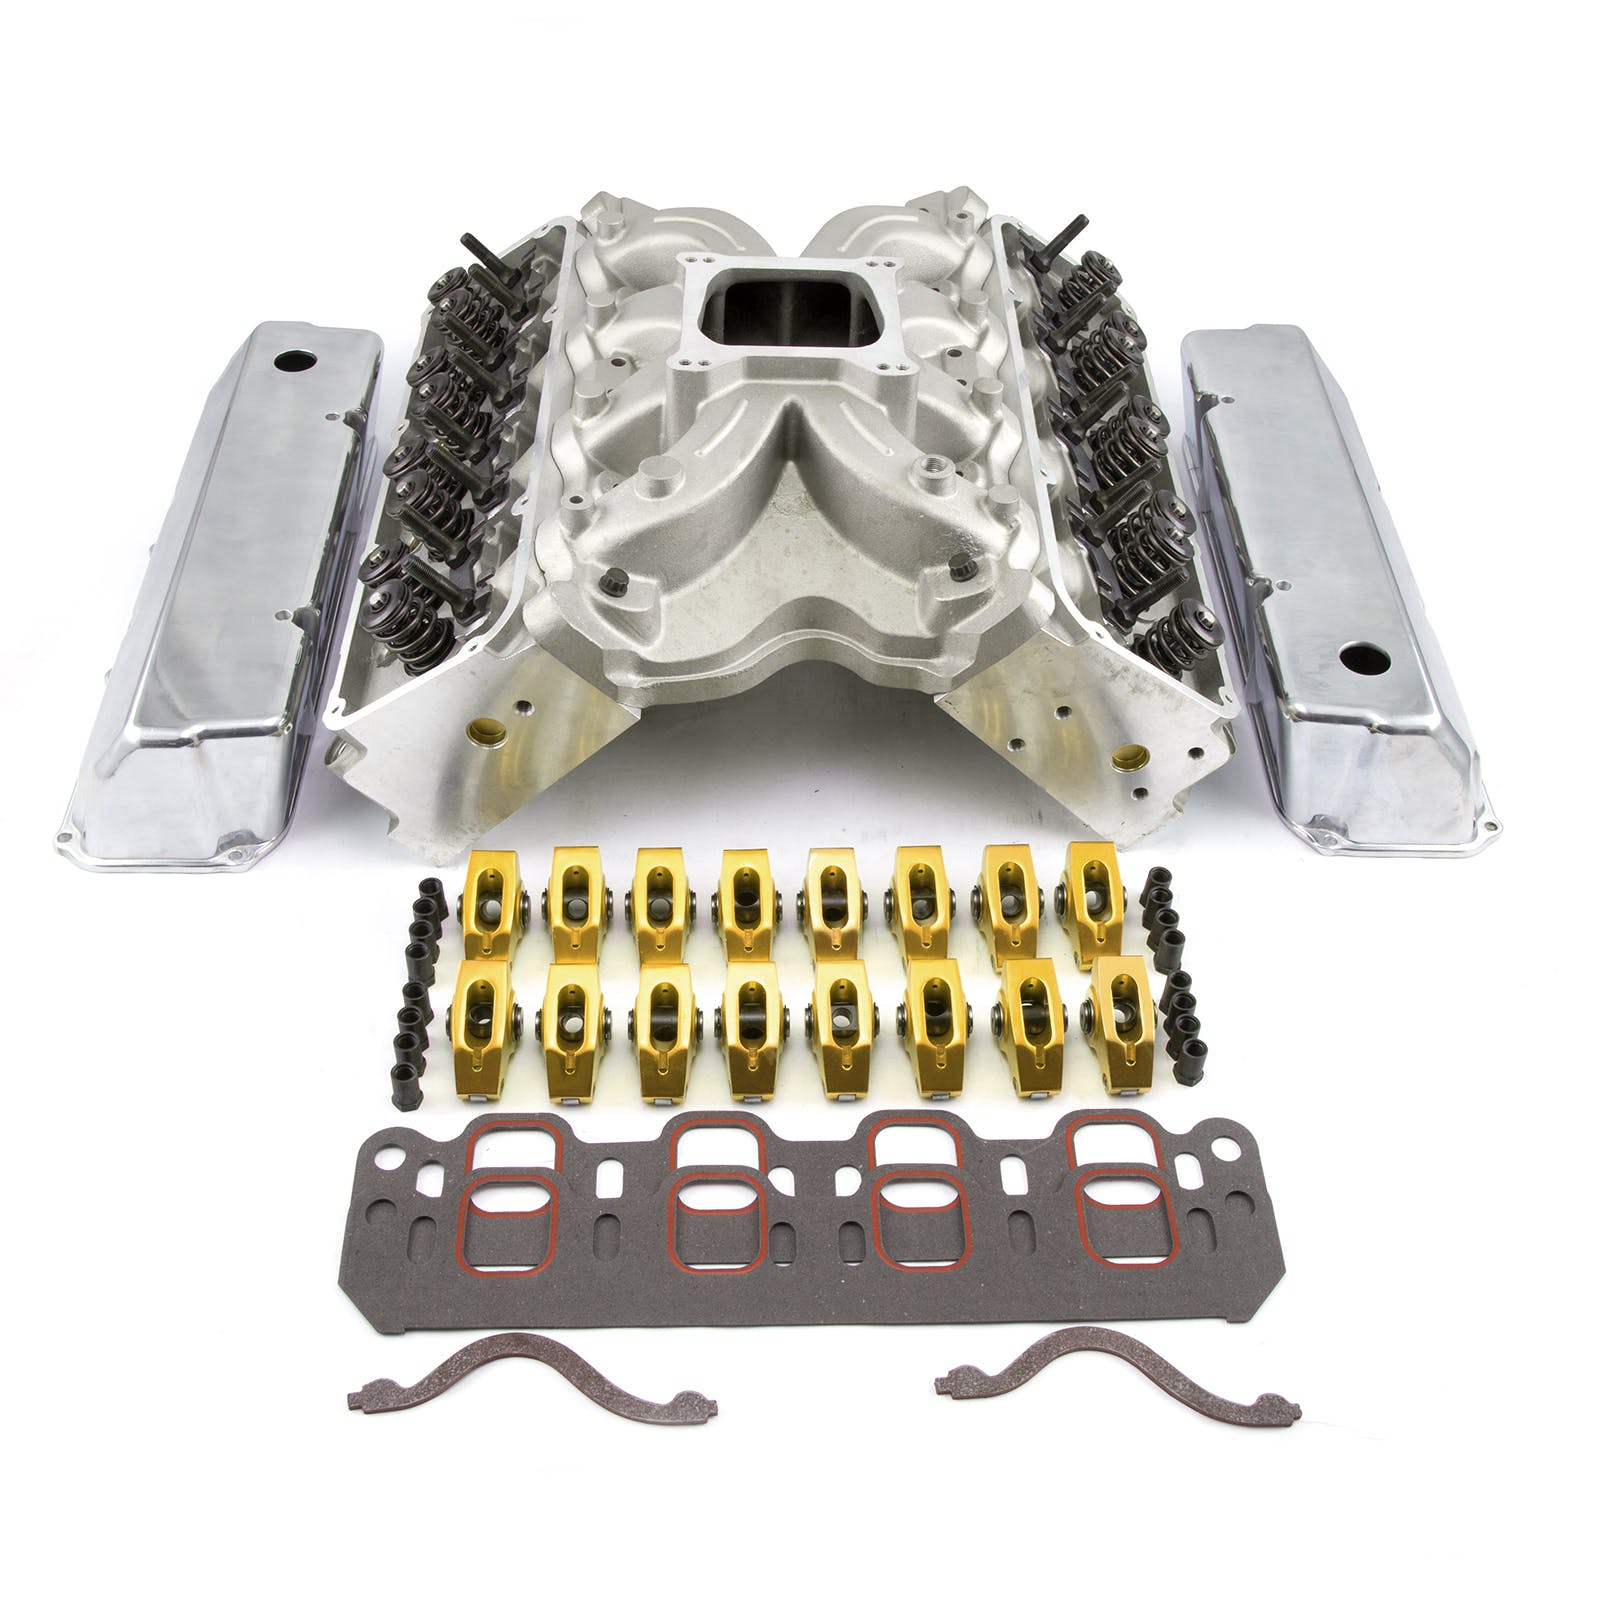 Speedmaster PCE435.1072 CNC Solid-R Cylinder Head Top End Engine Combo Kit